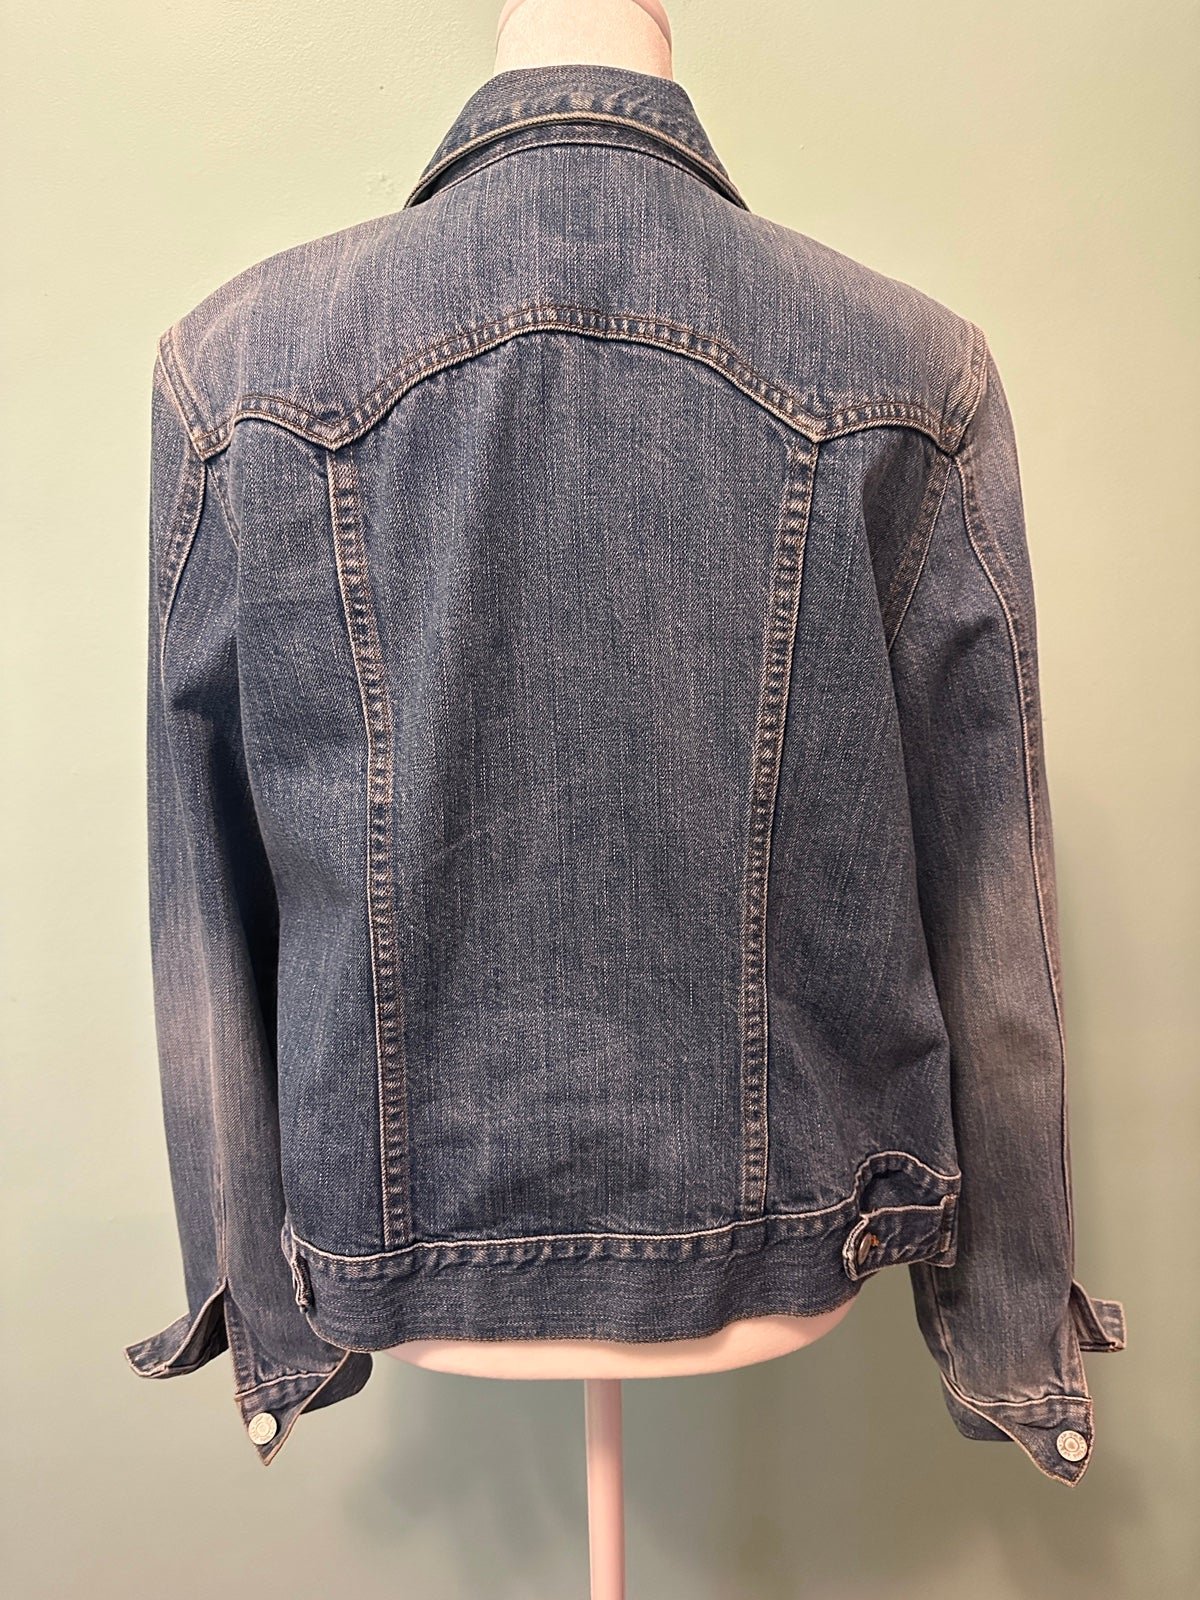 Special offer  Jean Jacket GAP Size Medium p0AOPDGyP New Style